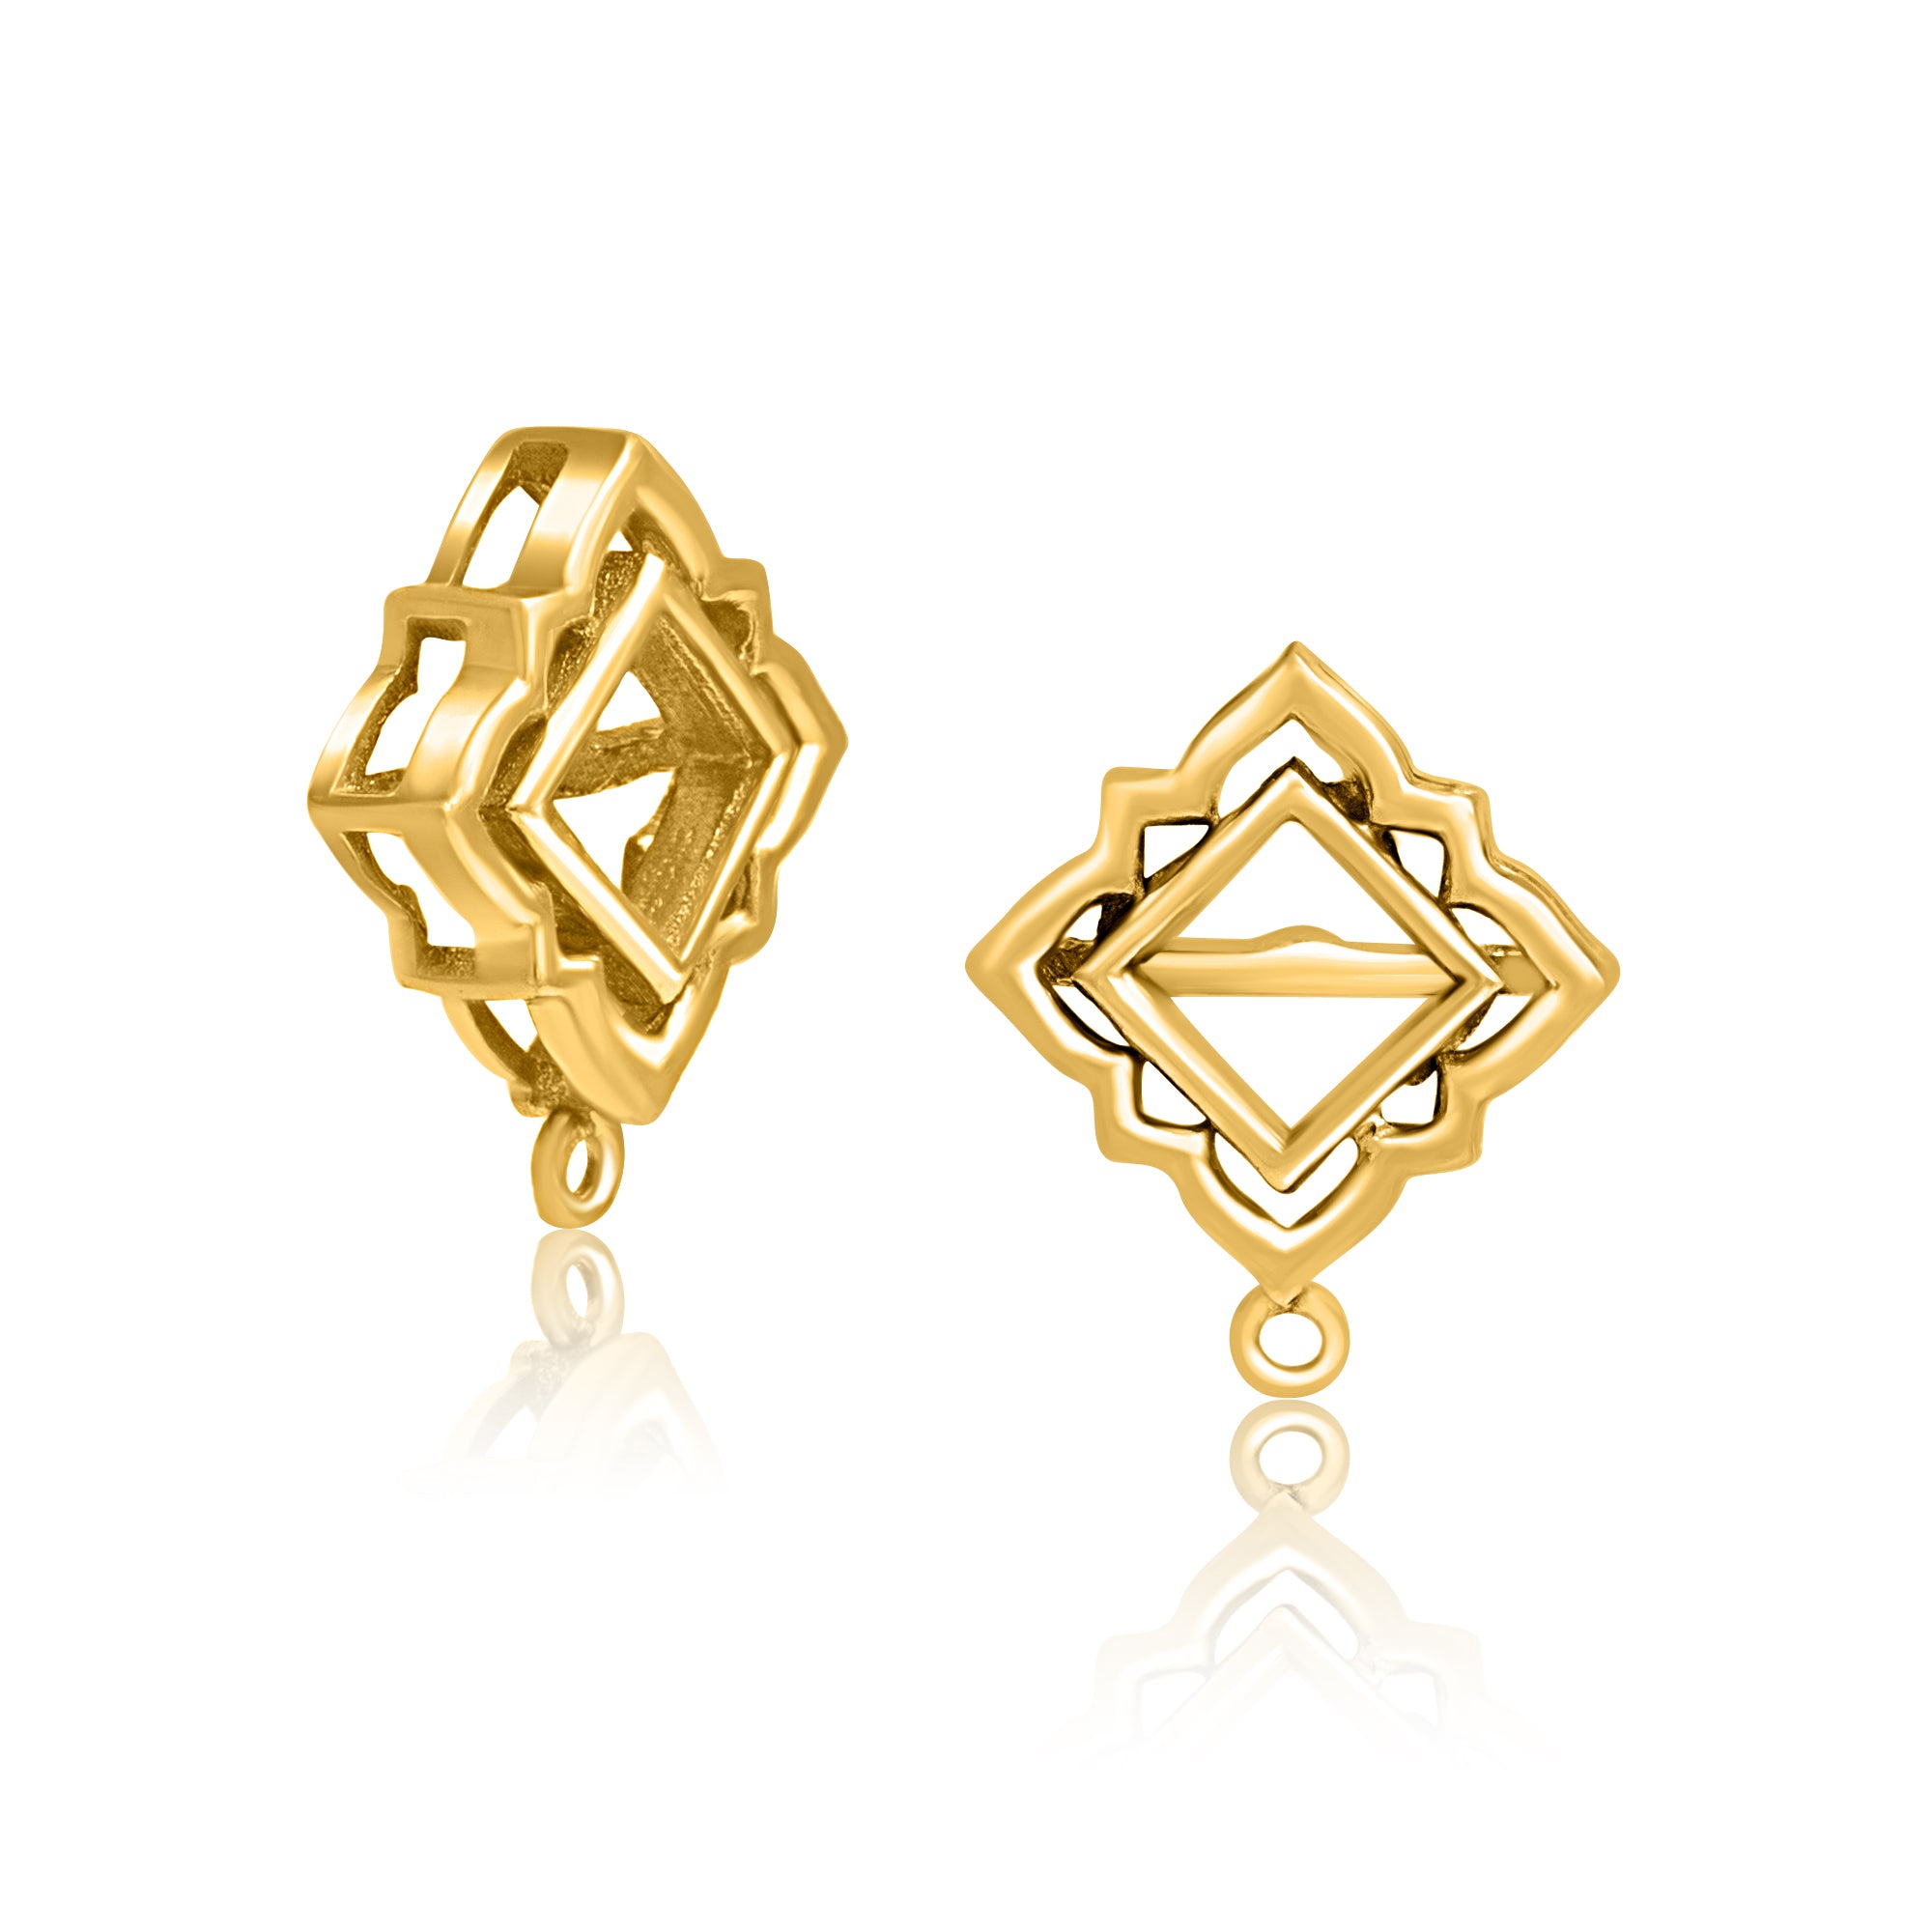 24K Gold Plating Love Theme Elysian Collection Earrings